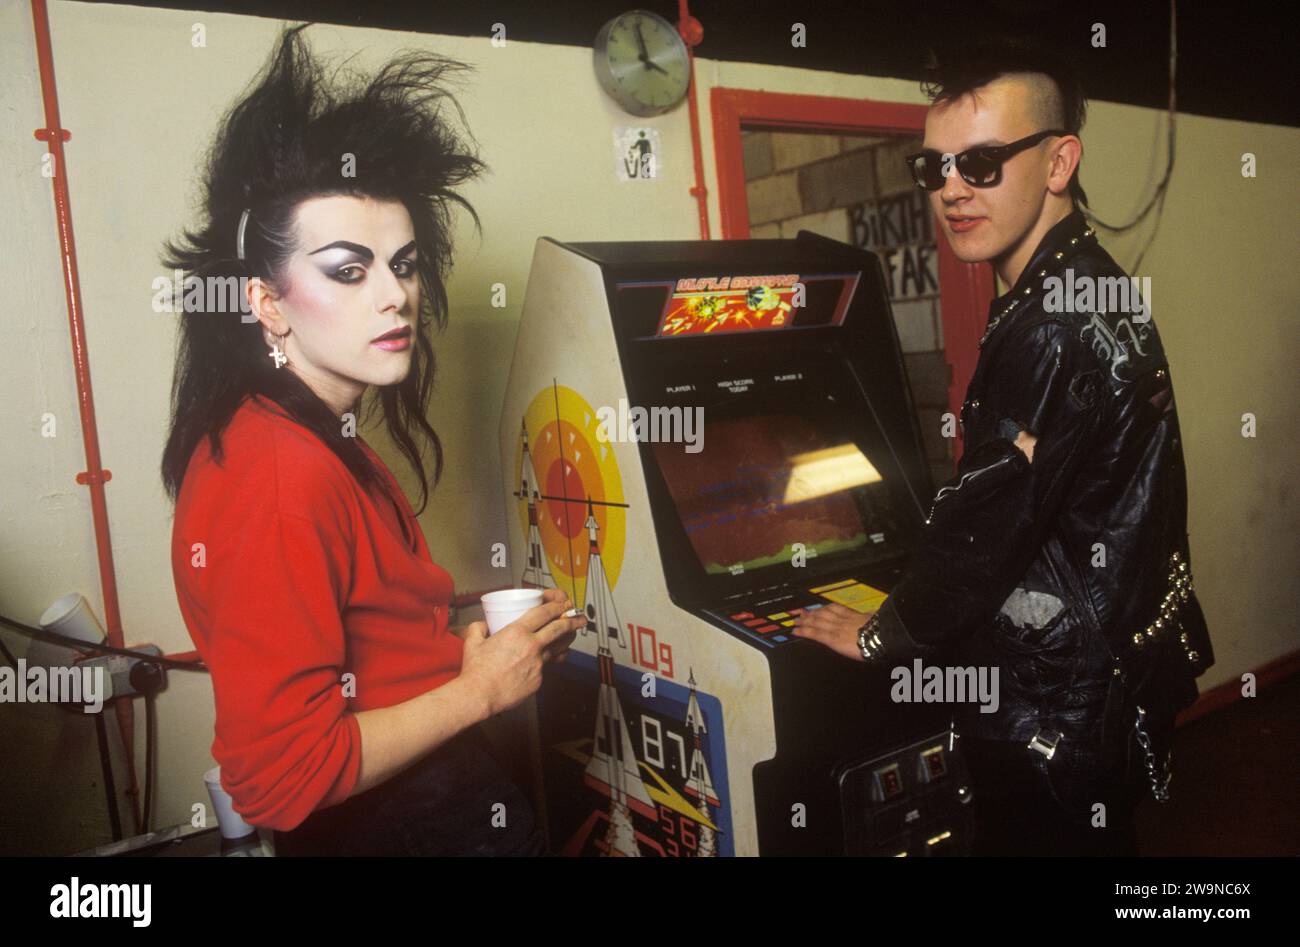 Androgynous fashion style New Romantic man 1980s young male student in makeup and 'big hair', with Punk friend in studded leather jacket playing on a Space Invader machine. College student St Martins School of Art London UK. Men wearing makeup.1985 HOMER SYKES Stock Photo